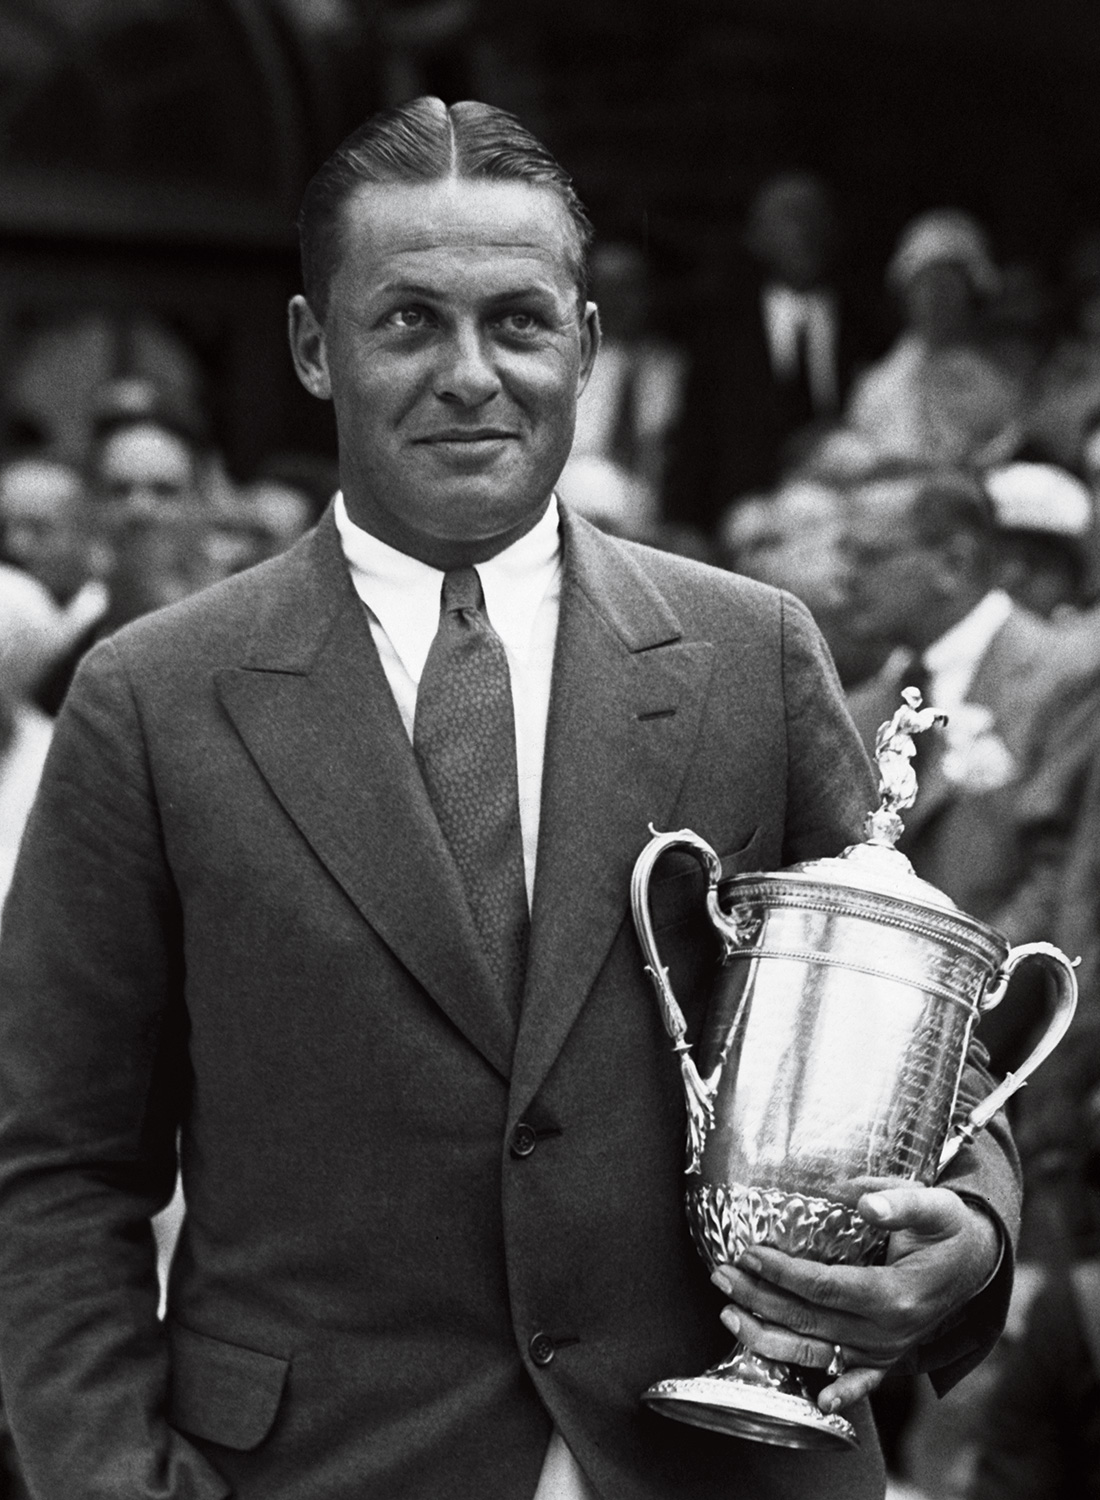 Bobby Jones won the 1929 US Open playoff by 23 strokes, but under the new format, he could have lost.